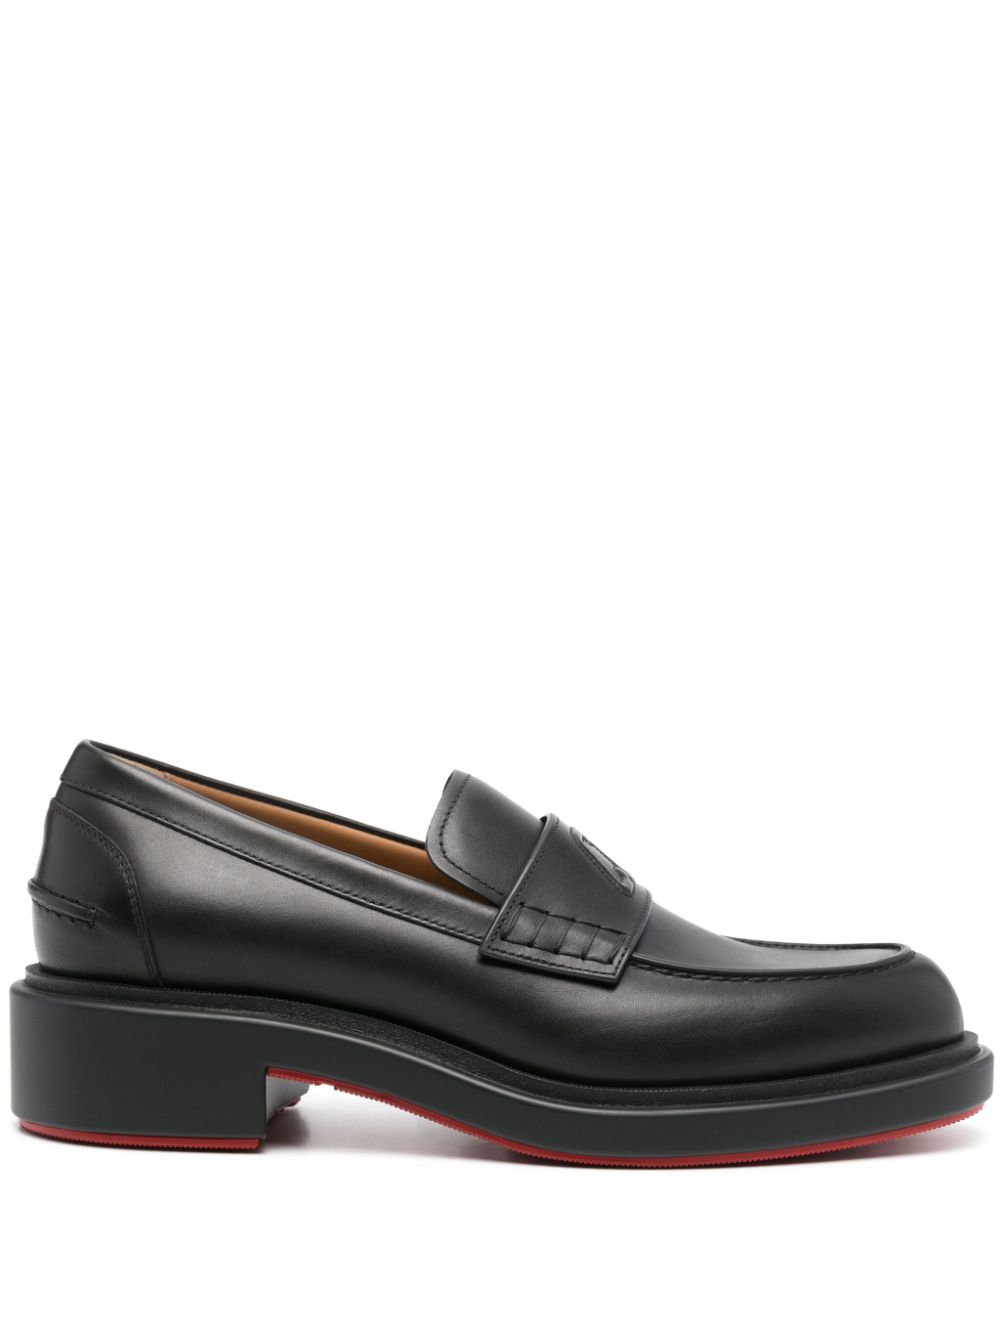 Christian Louboutin Smooth Grain Almond Toe Loafers In Black